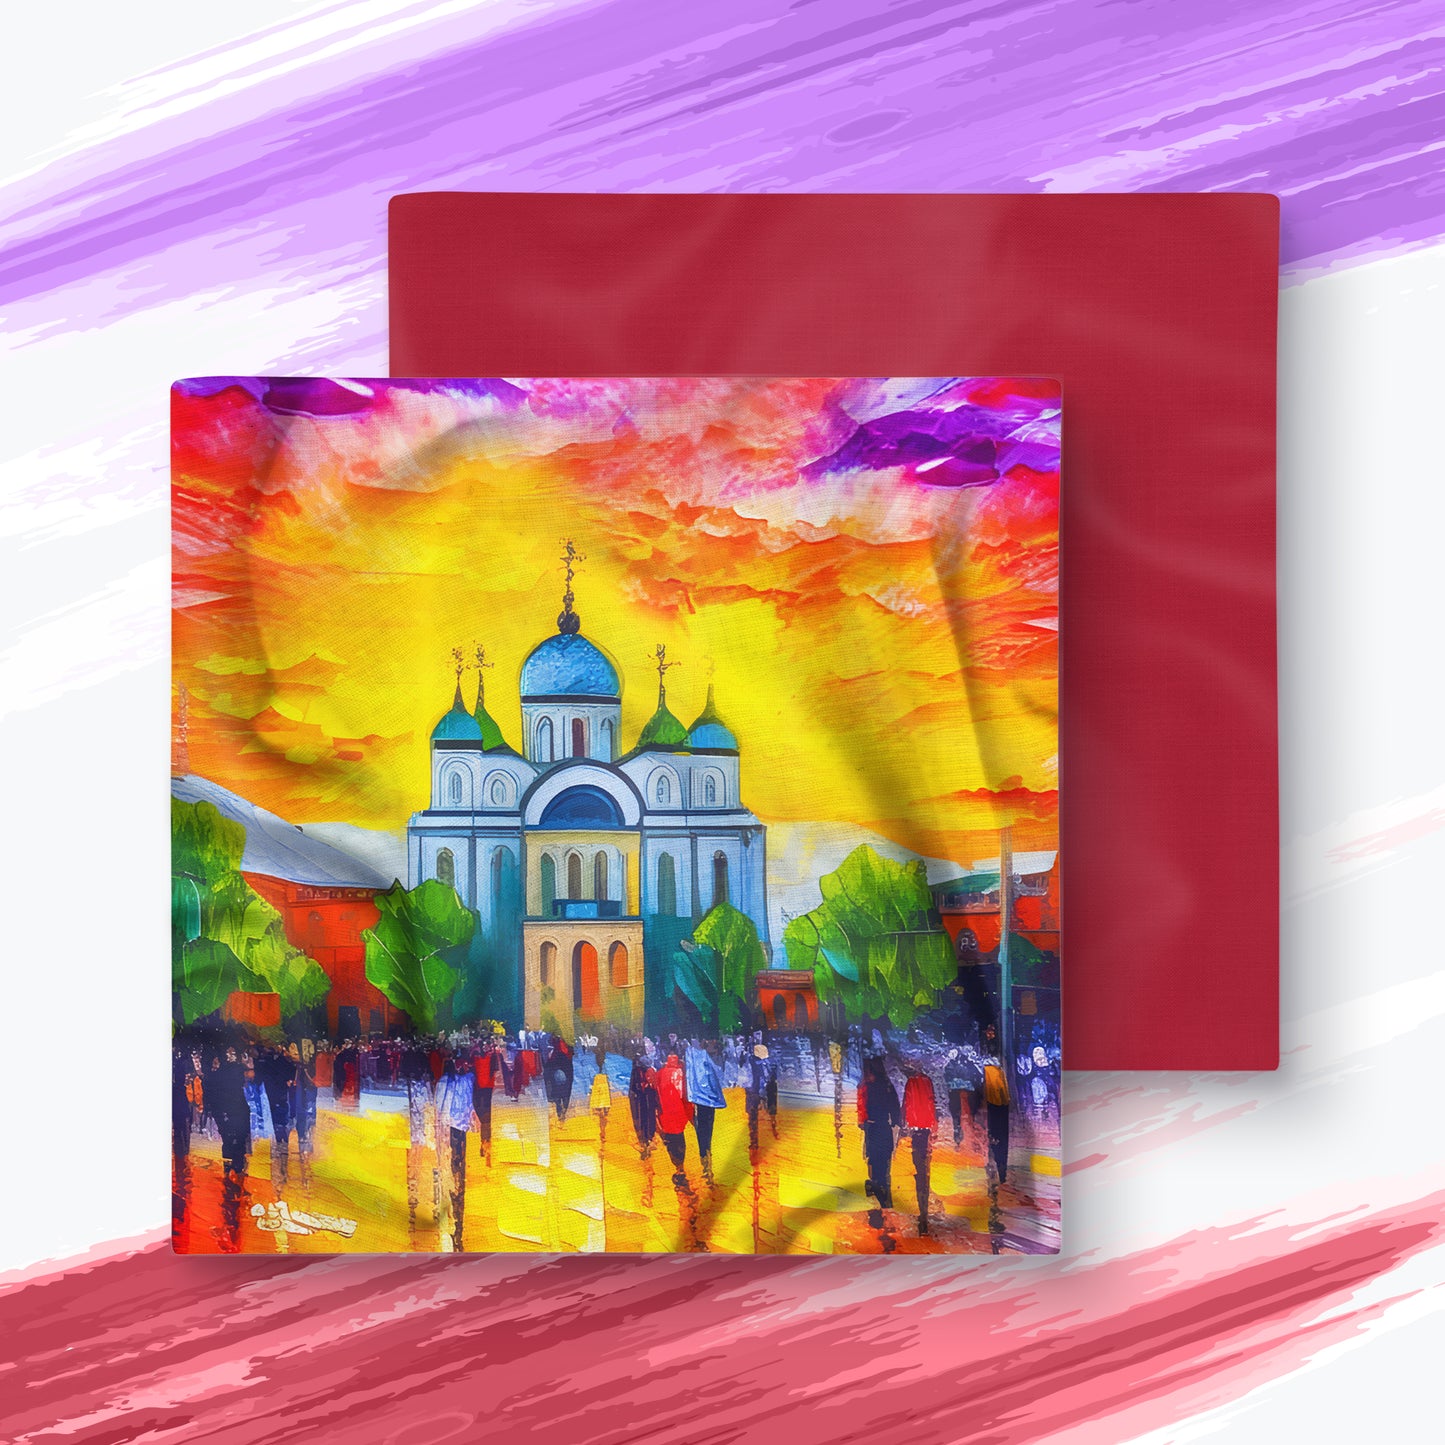 Two-sided premium pillow case with cityscape painting print - Sofia | Seepu